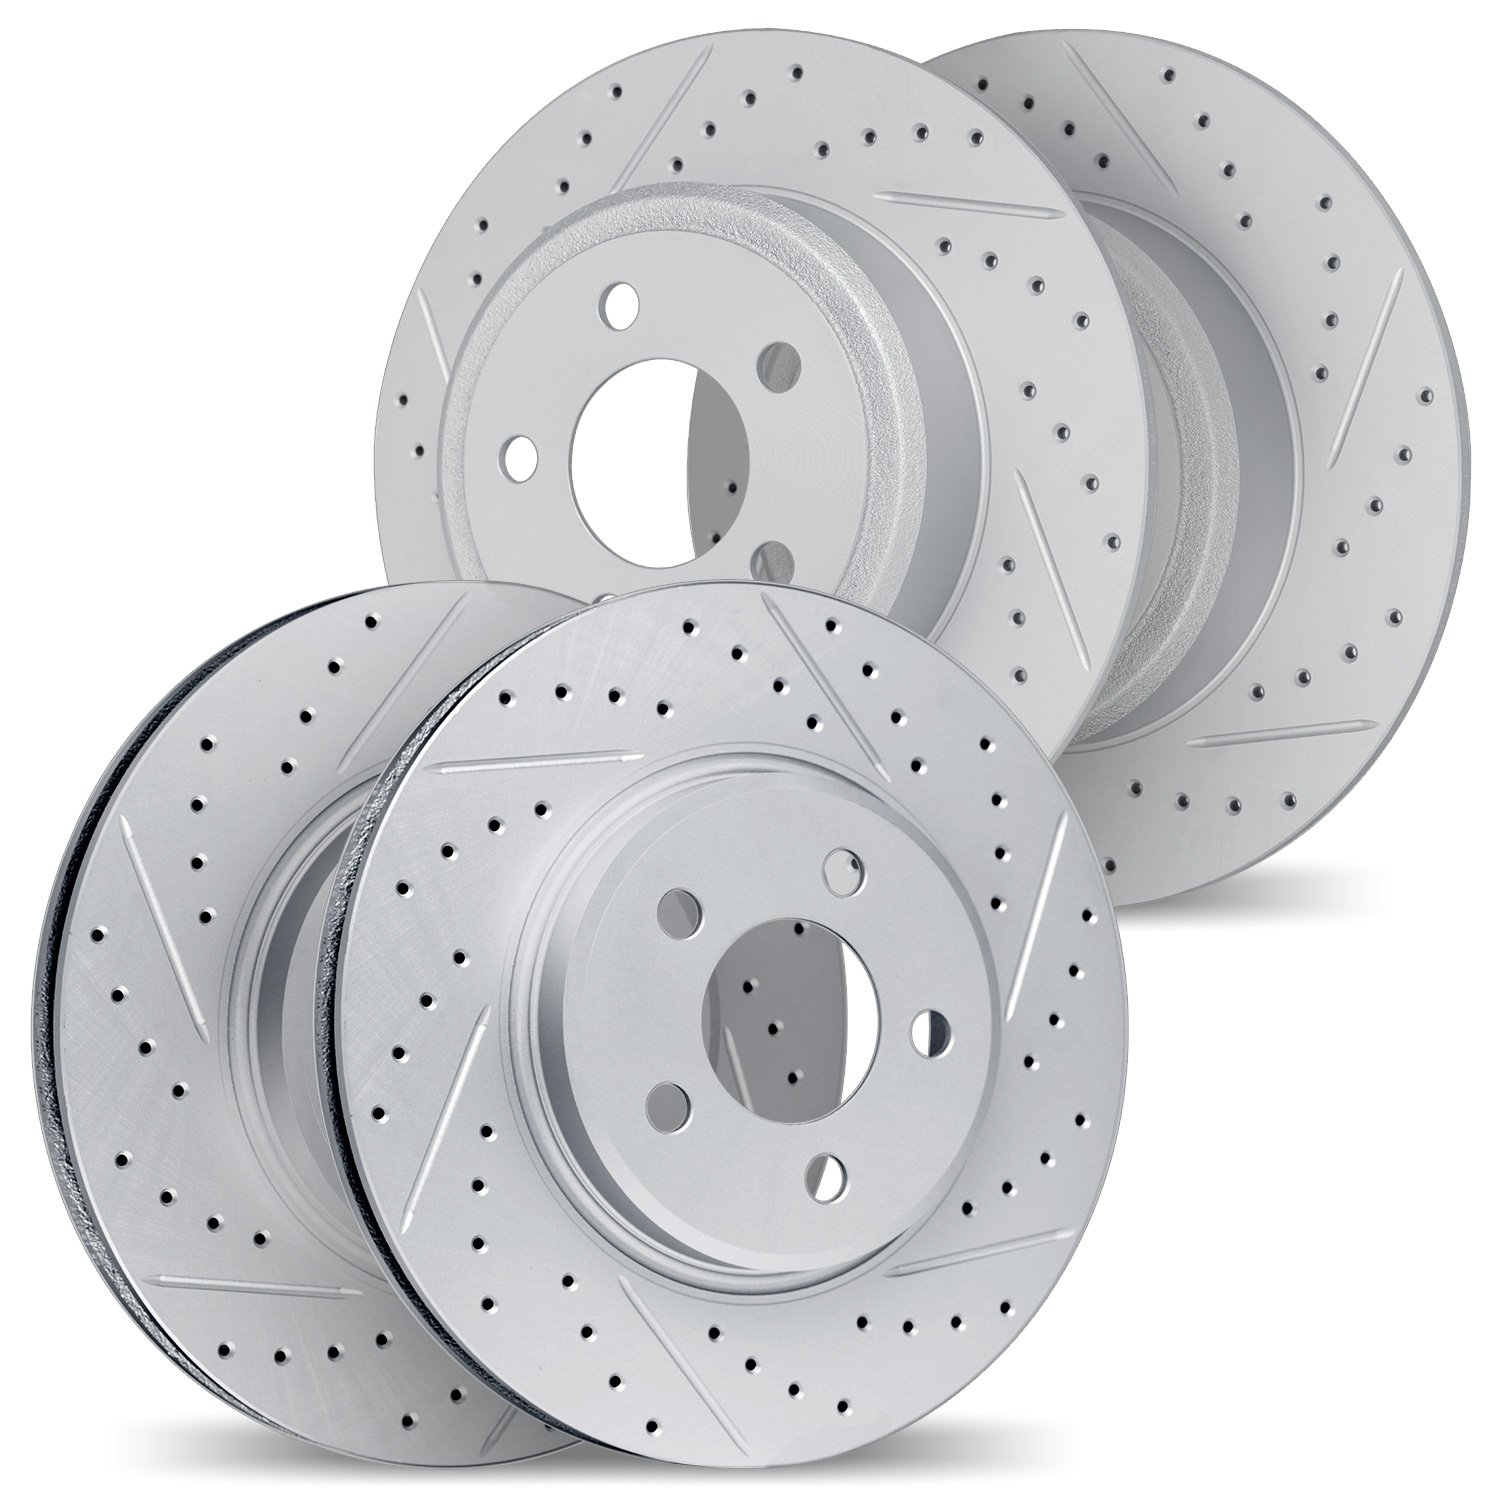 2004-59028 Geoperformance Drilled/Slotted Brake Rotors, 2016-2017 Acura/Honda, Position: Front and Rear